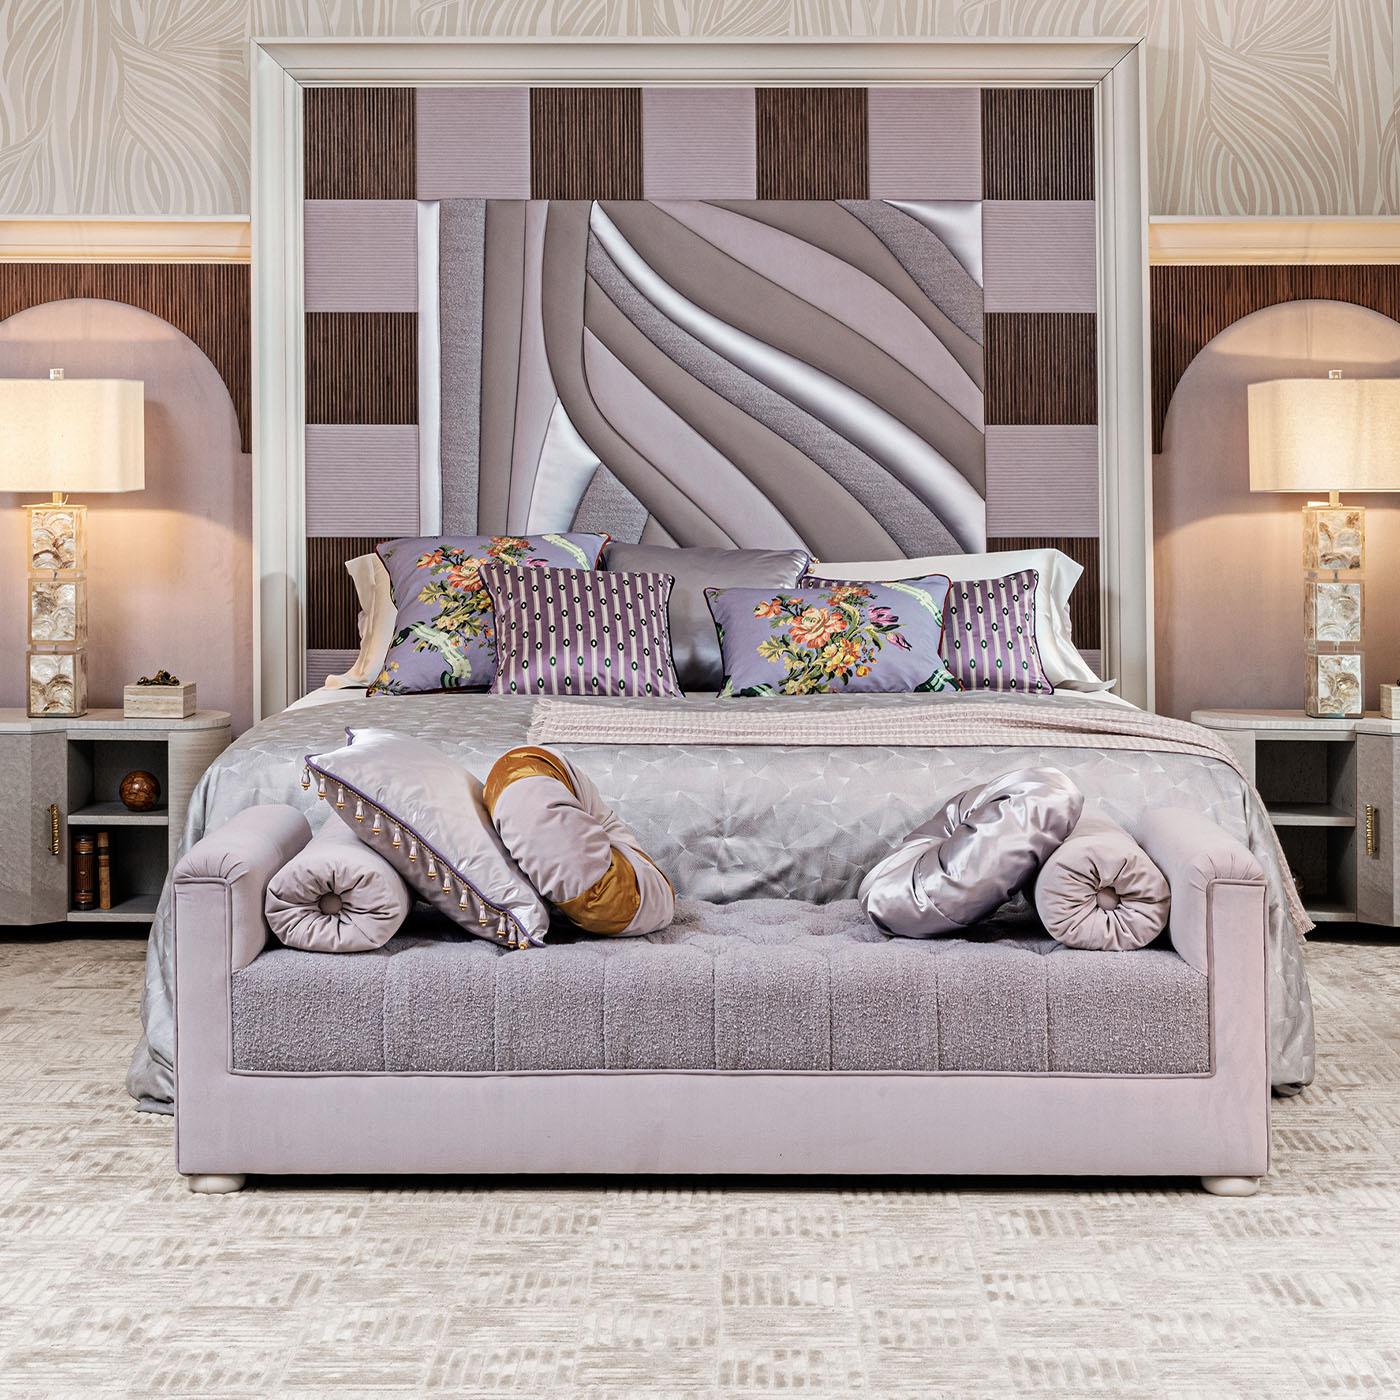 The Art Deco-inspired design of the Amelie bench features fine craftsmanship. The lilac fabric harmonized with sinuous lines make it a perfect piece for any room.